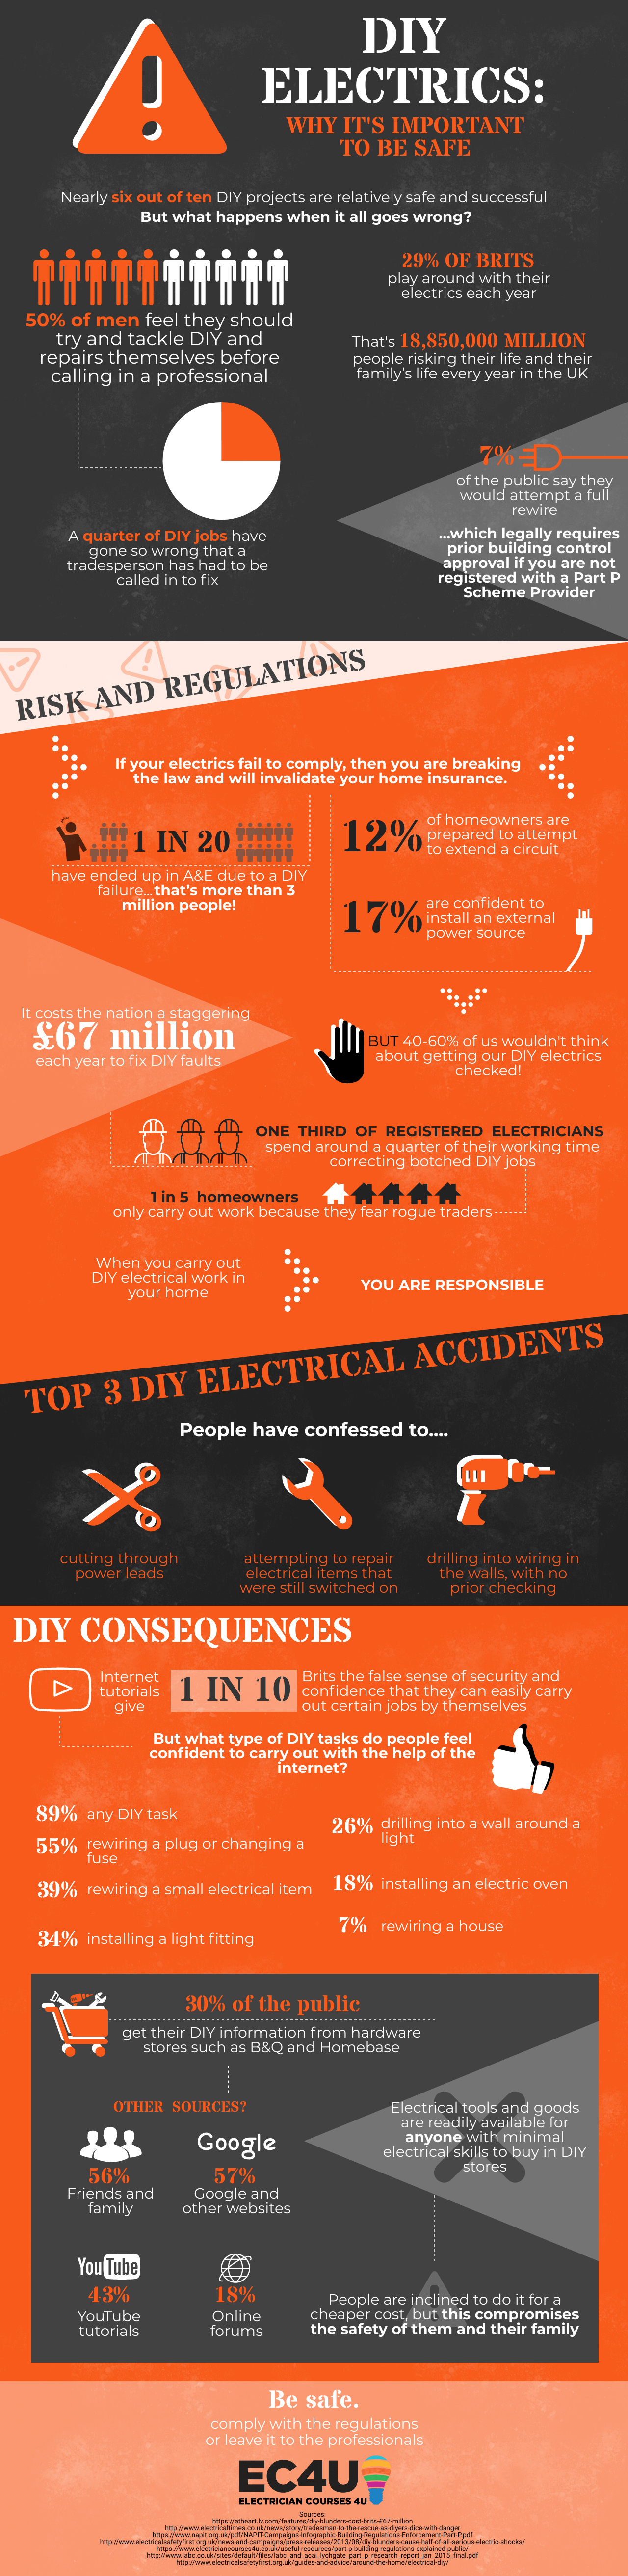 DIY electrics - the facts